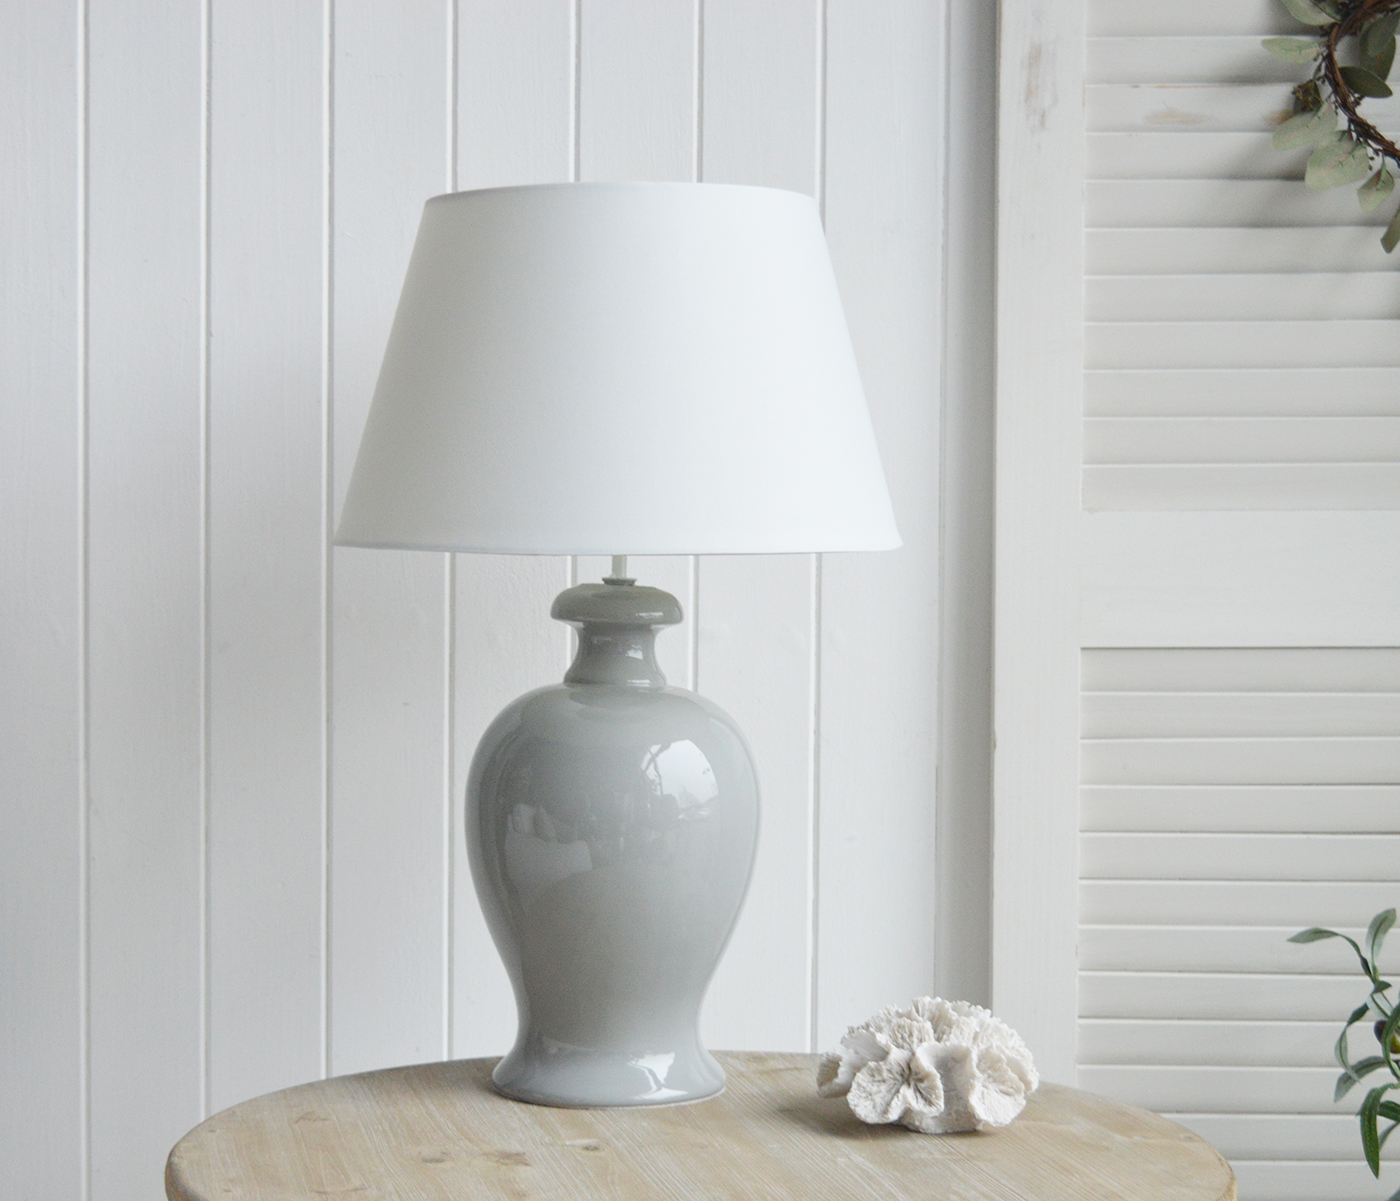 Pembroke Ceramic Large Grey Blue Lamp from The White Lighthouse Furniture. A feature lamp on any table in mocern farmhouse, coastal or country styled home interior